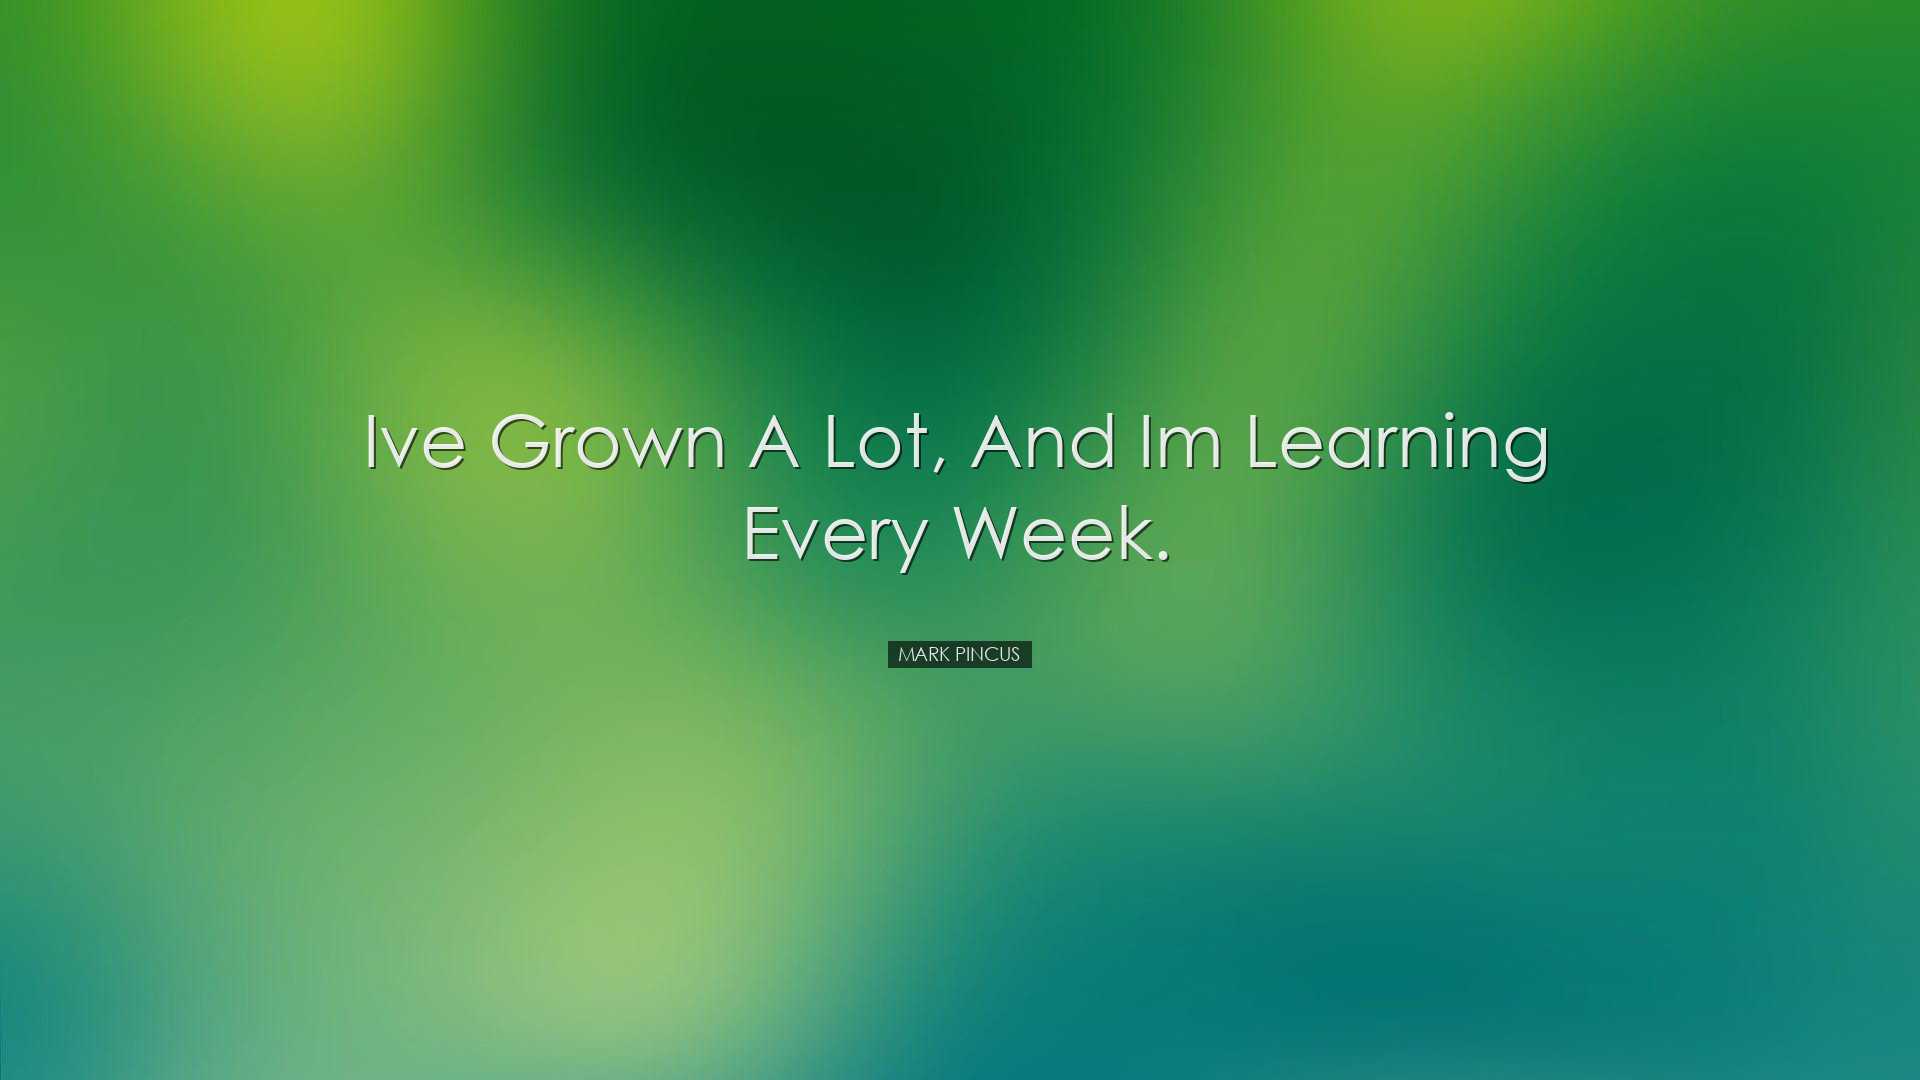 Ive grown a lot, and Im learning every week. - Mark Pincus